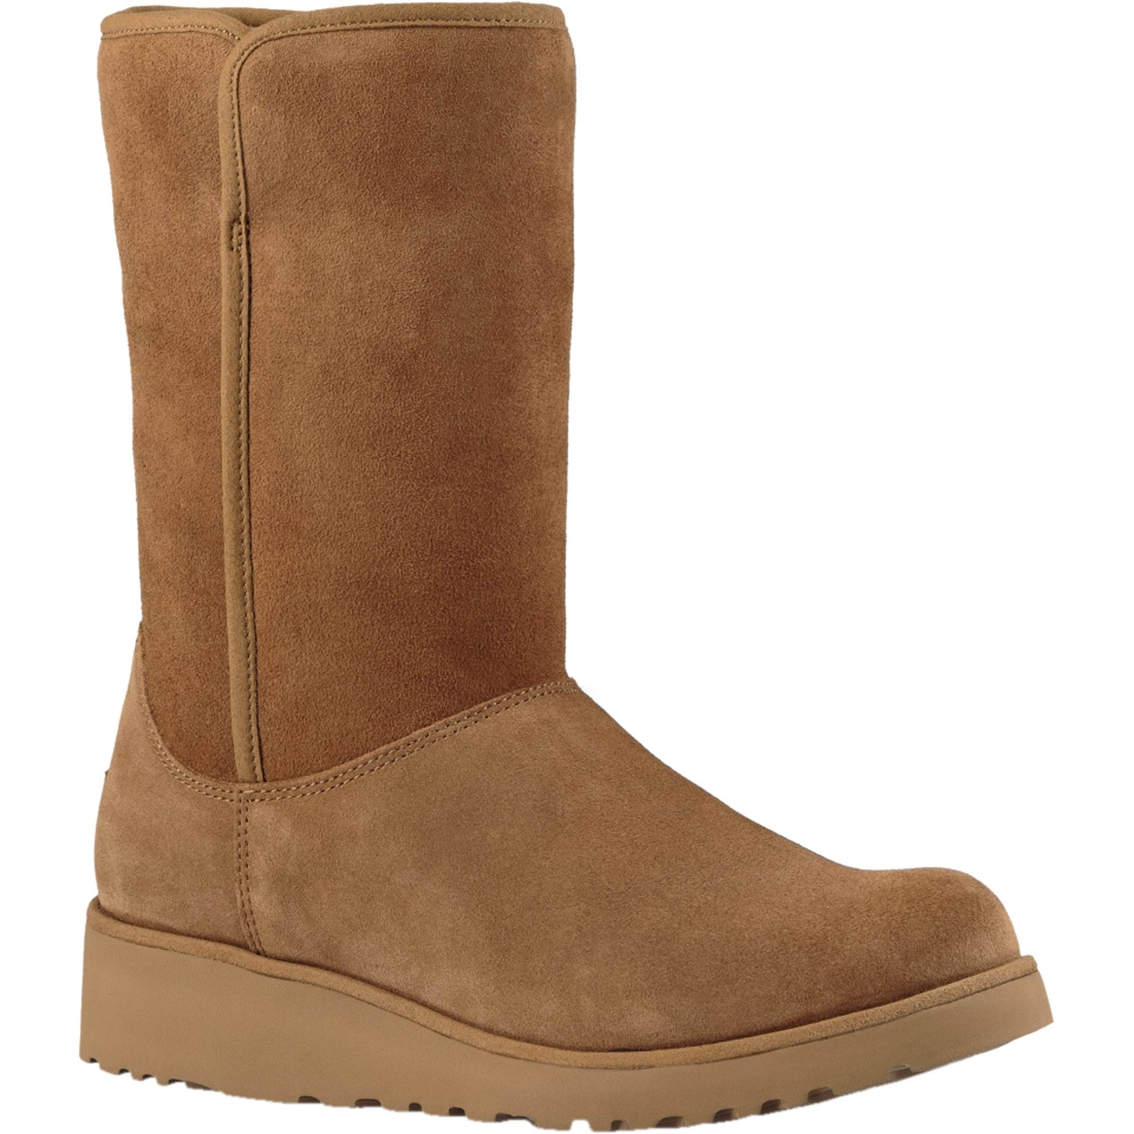 Ugg Amie Slim Wedge Boots | Tall Boots | Shoes | Shop The Exchange